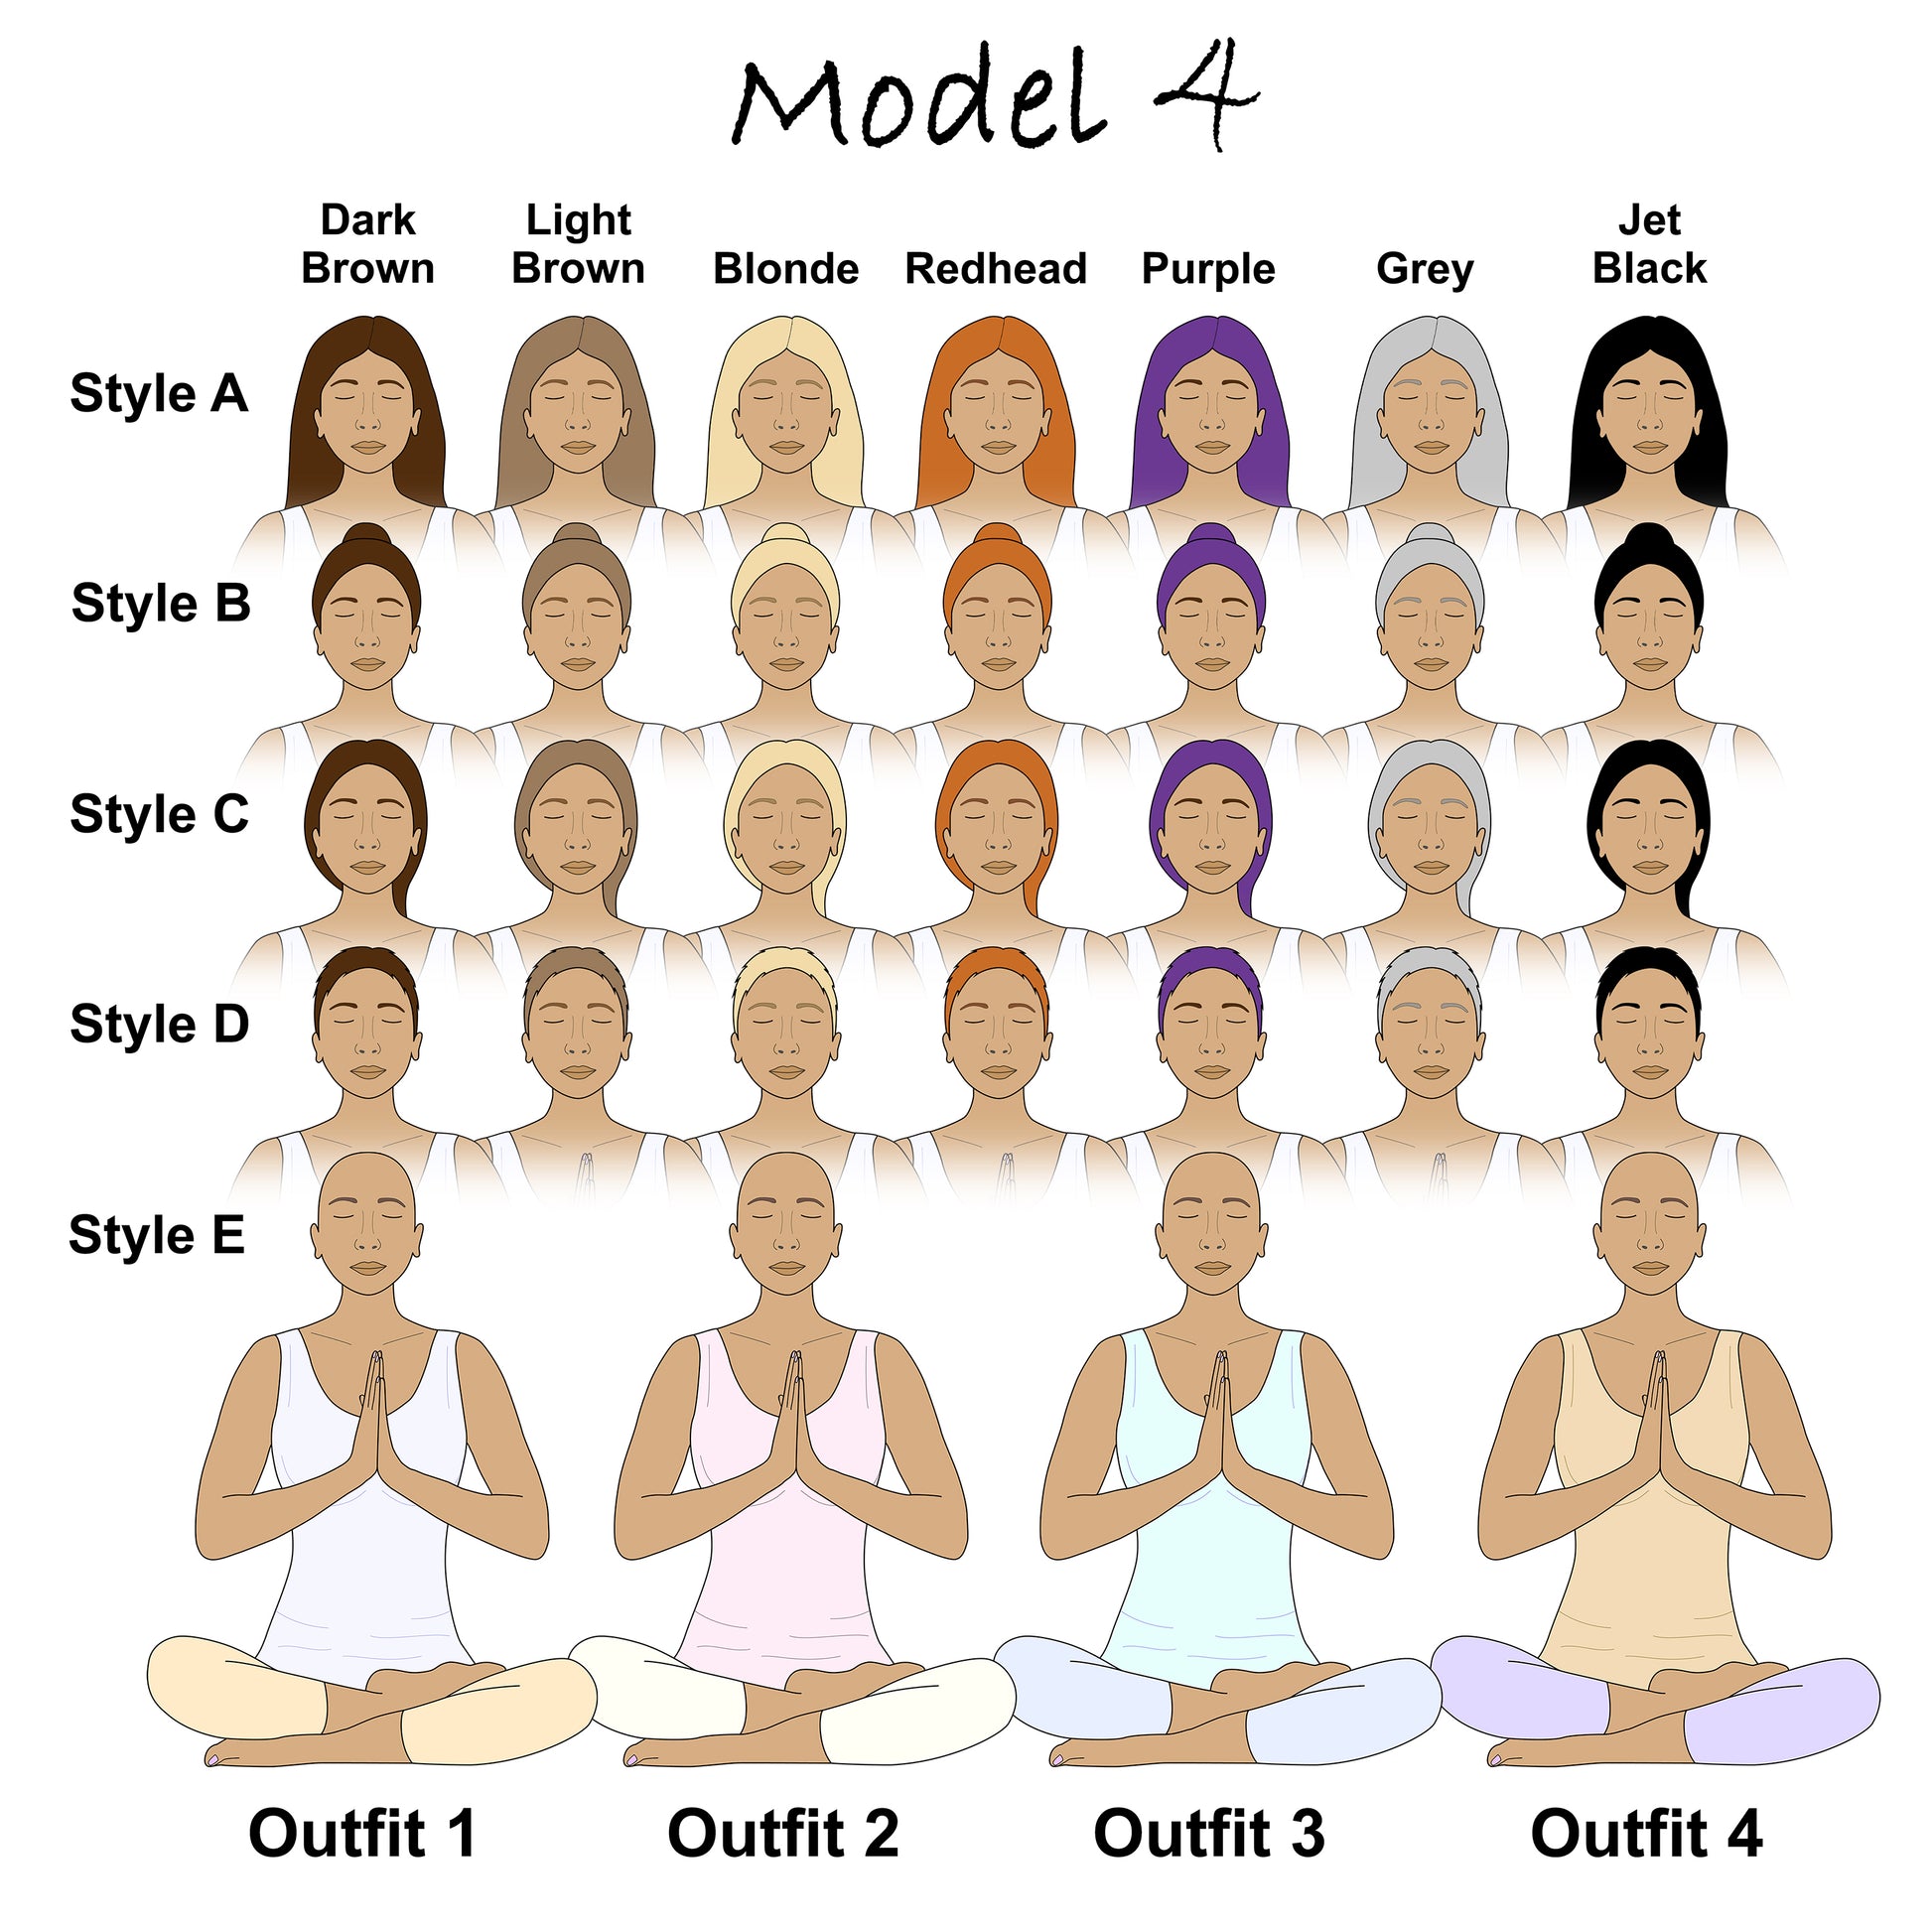 Personalised yoga mug customisation options chart. Model 4. In the foreground, four Asian women in different outfits (blue, pink, turquoise and sand coloured), all in yoga meditation poses. Hair style and hair colour variations are behind them, including Brown, Blonde, Redhead, Grey & Bald.